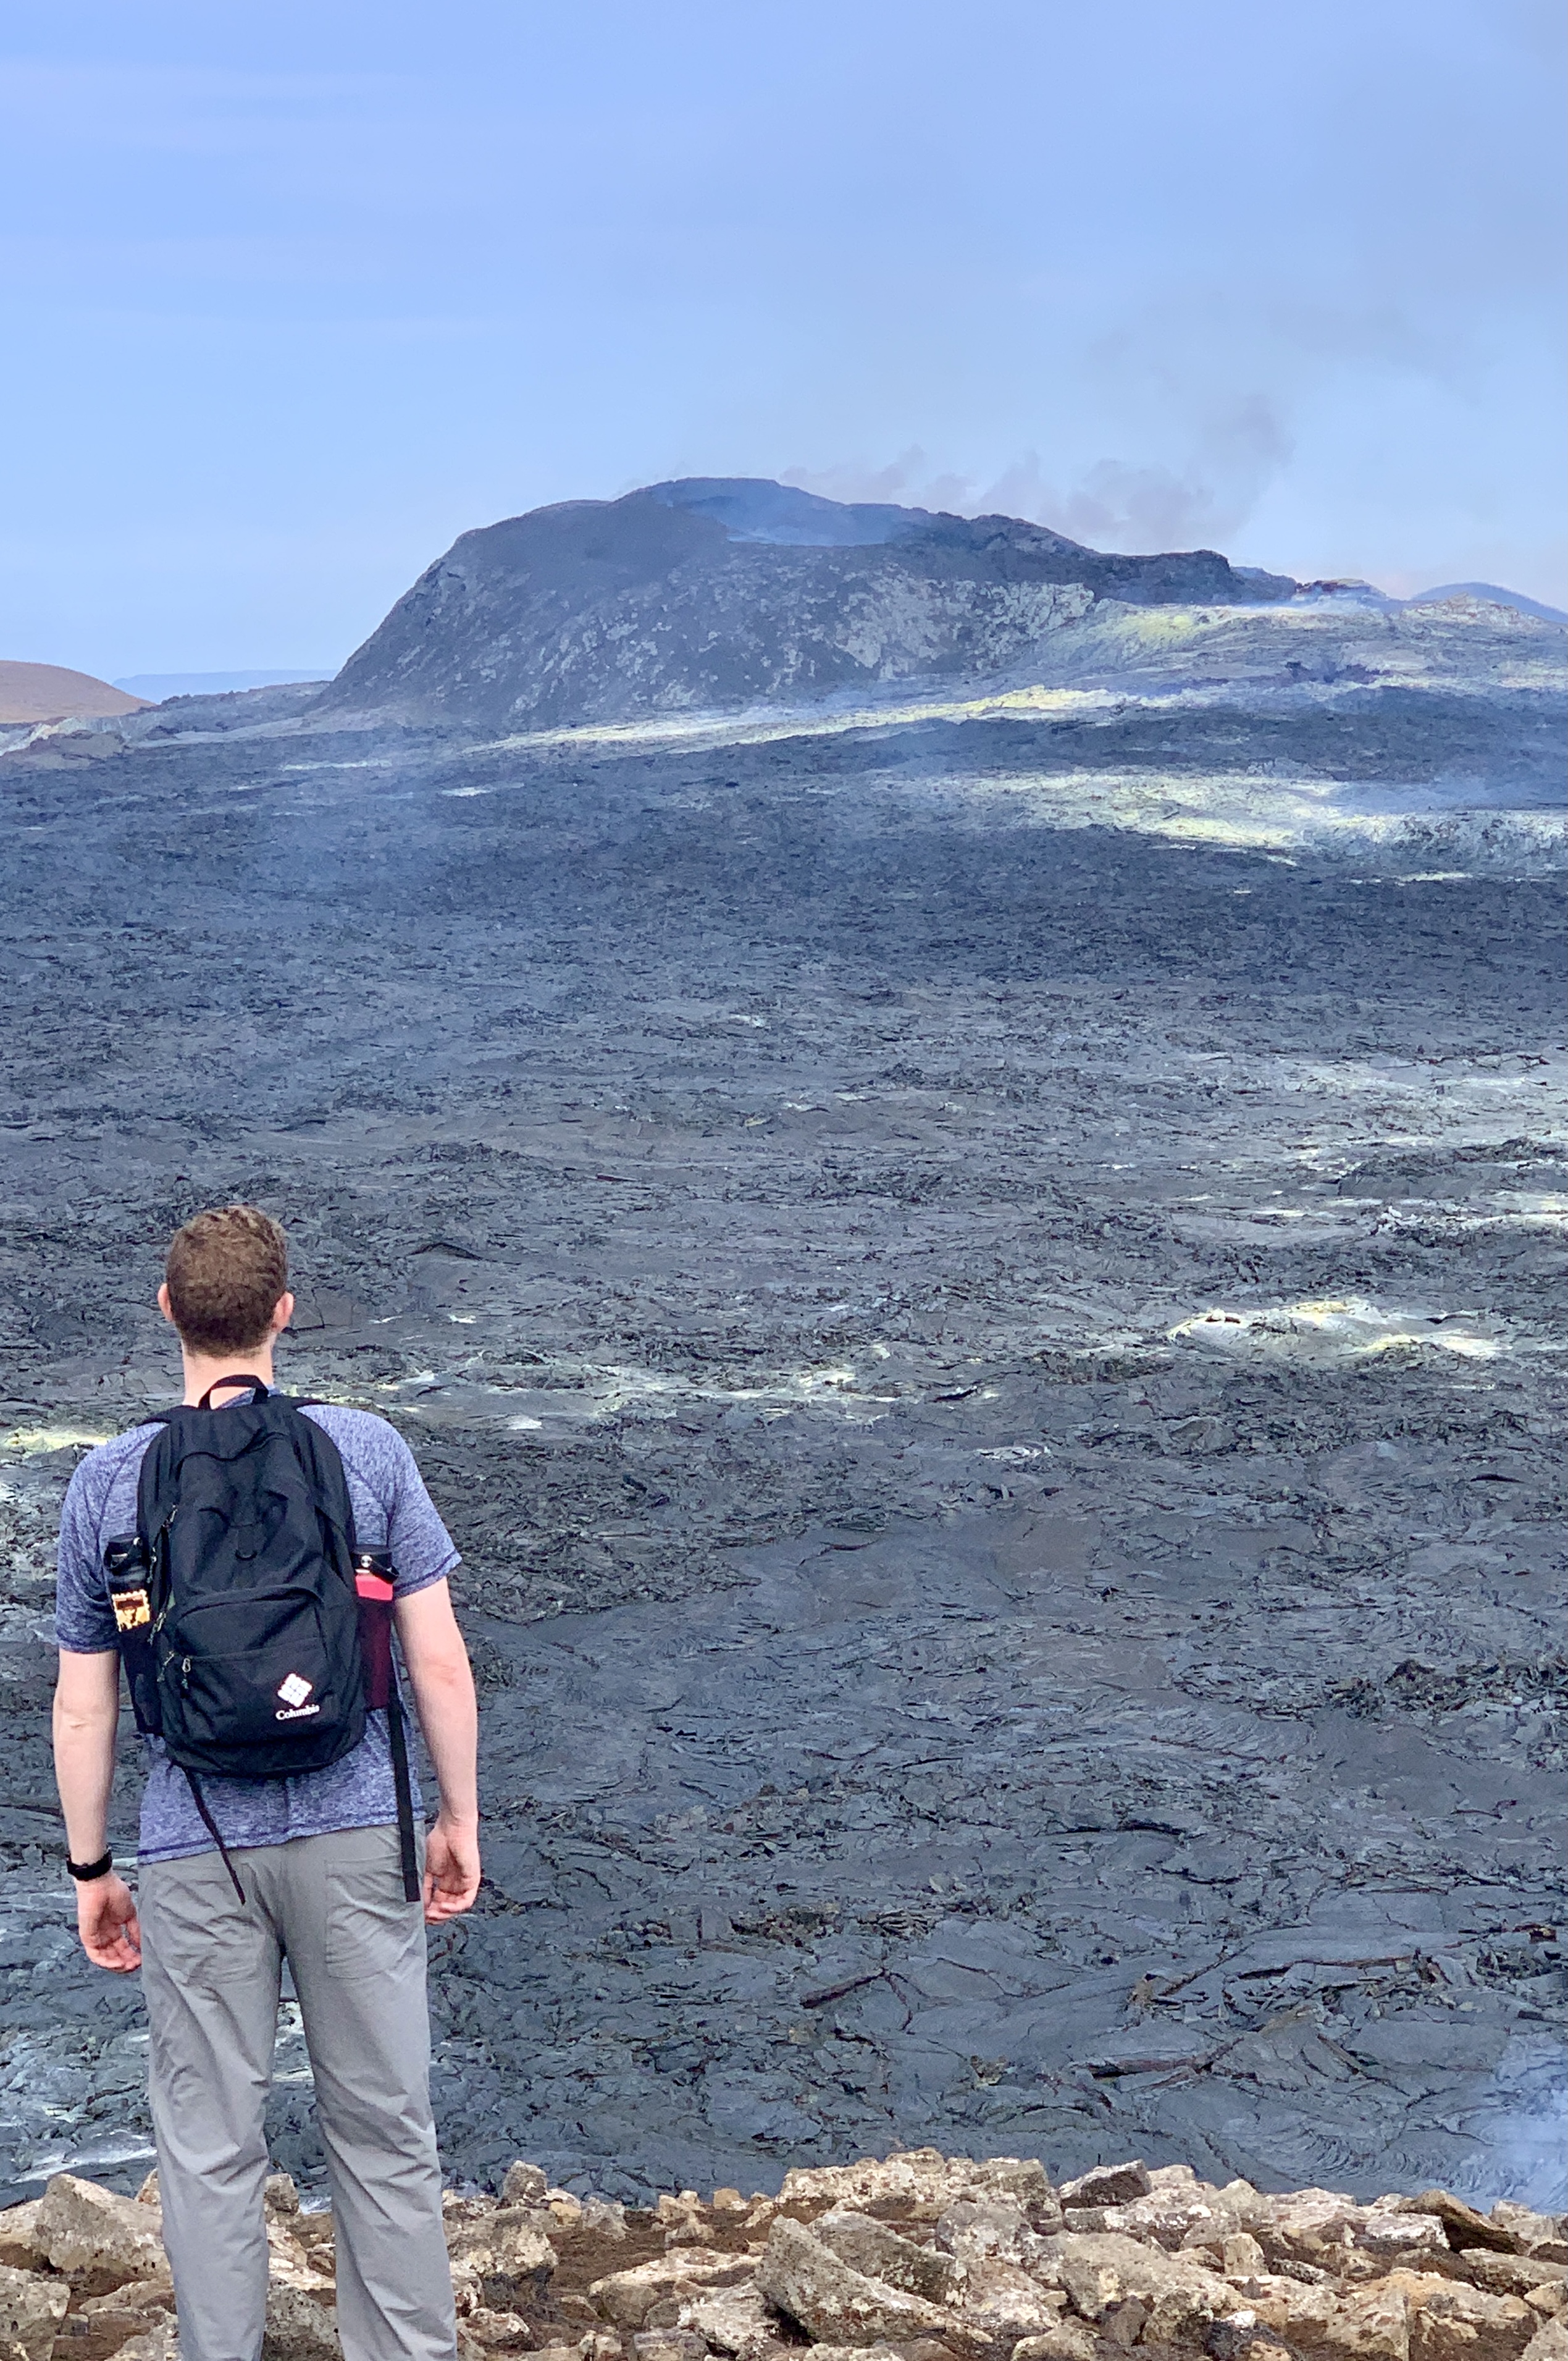 Mark looking out at the smoking crater & fresh lava